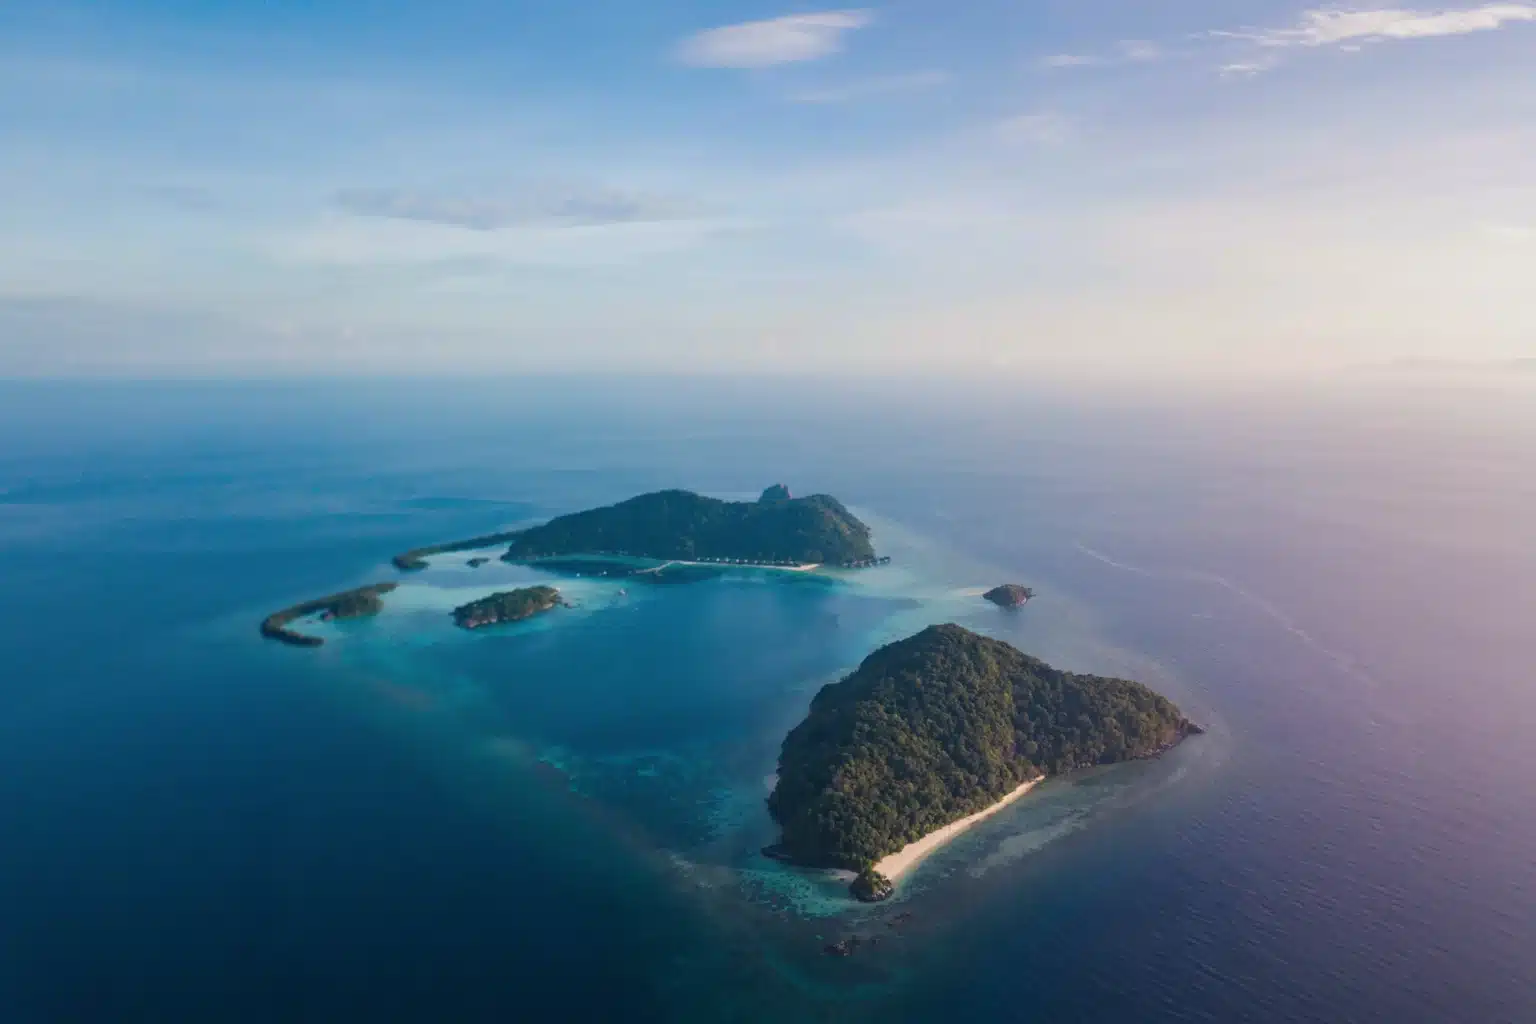 AS_Indonesia_Anambas Archipelago_Bawah-areal view